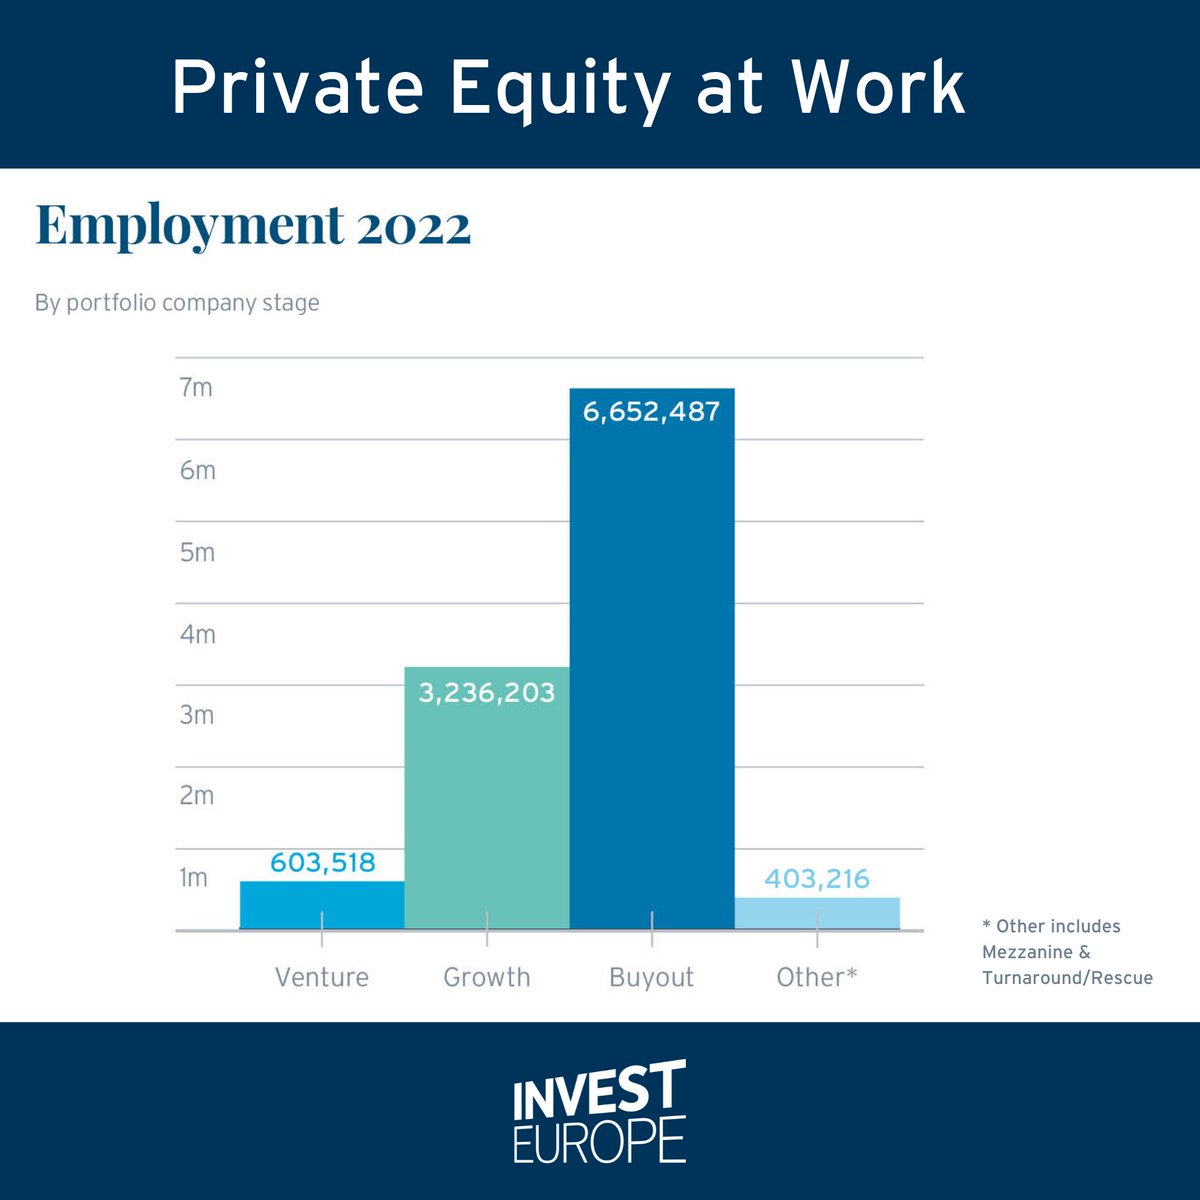 There were 6,690 portfolio companies in a growth stage backed by #PrivateEquity, with a total of 3.2 million employees.

👉 24% of all companies backed by PE in Europe
👉 30% of the overall PE-backed workforce

#PrivateEquityAtWork ➡️ bit.ly/PEatWork

#VentureCapital